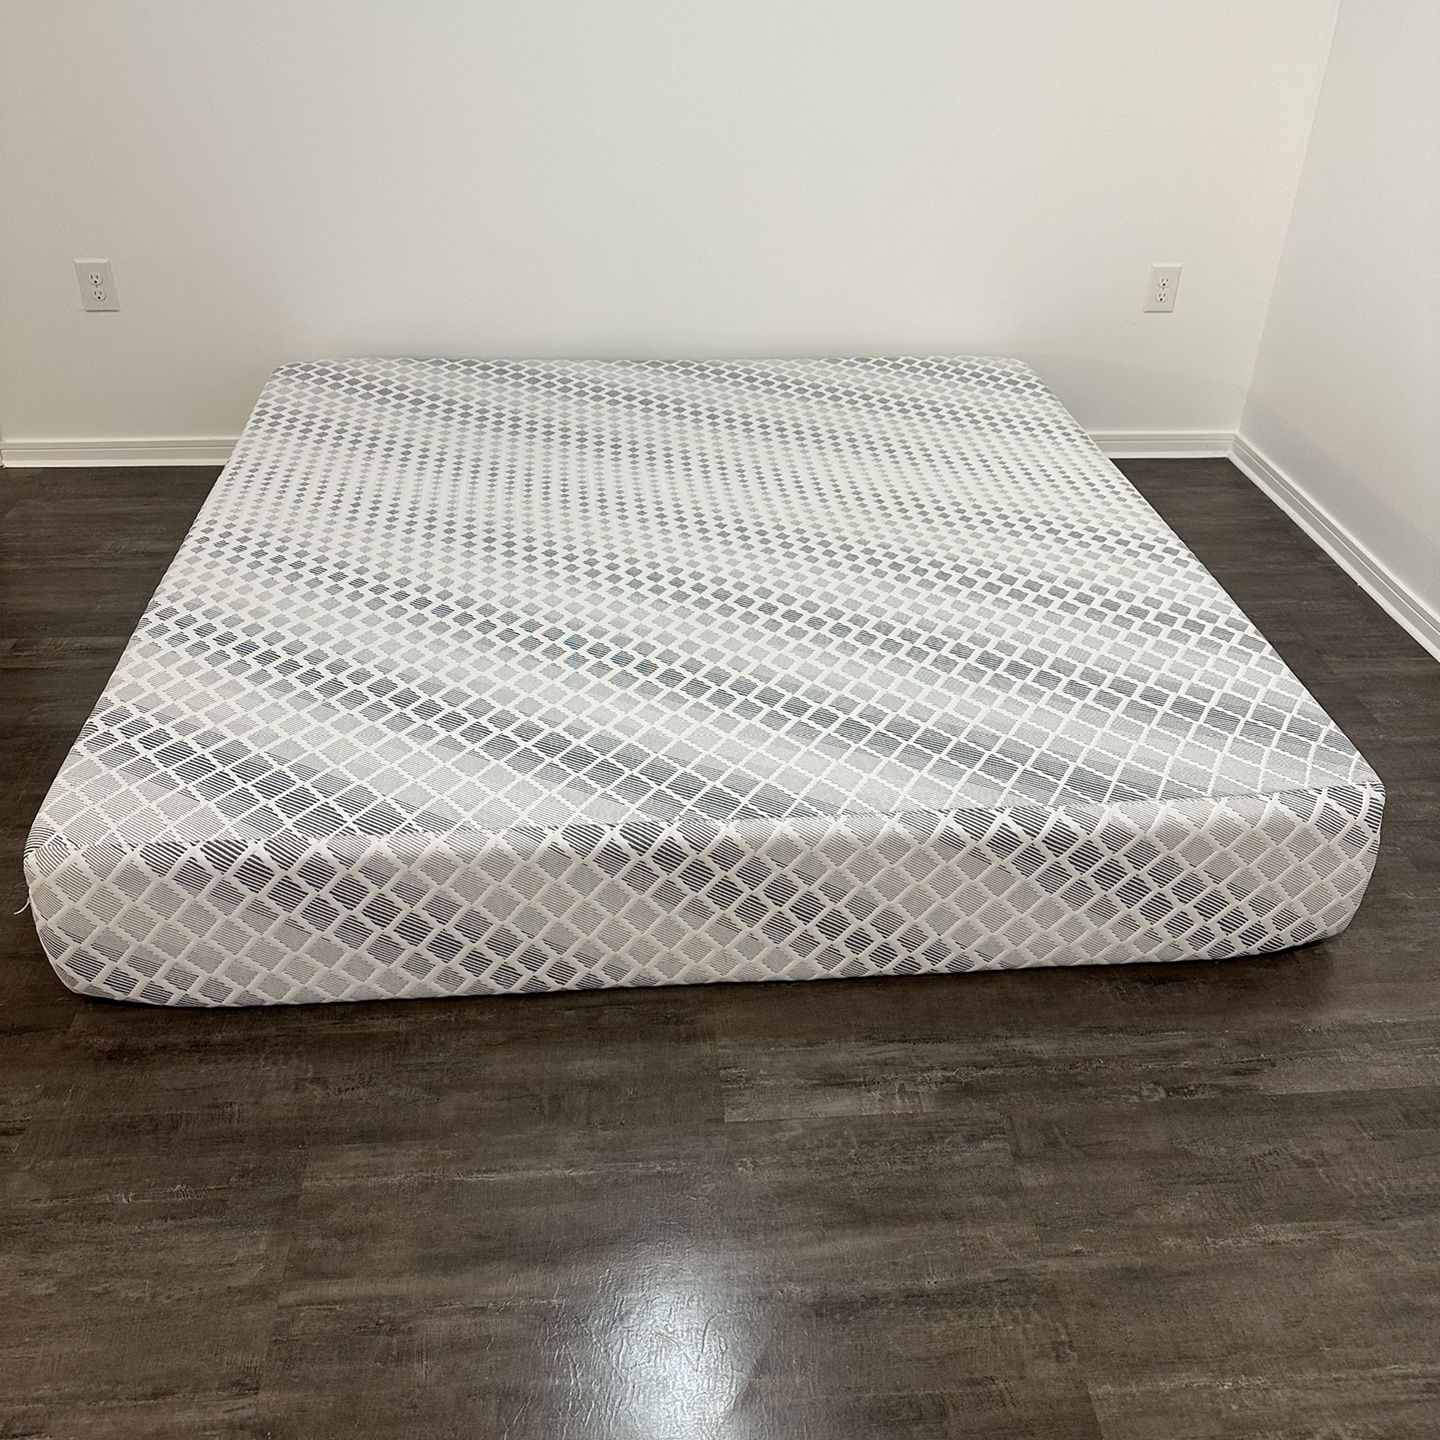 Like-New King Size Novaform Memory Foam Mattress: Firm Support, Excellent Condition 